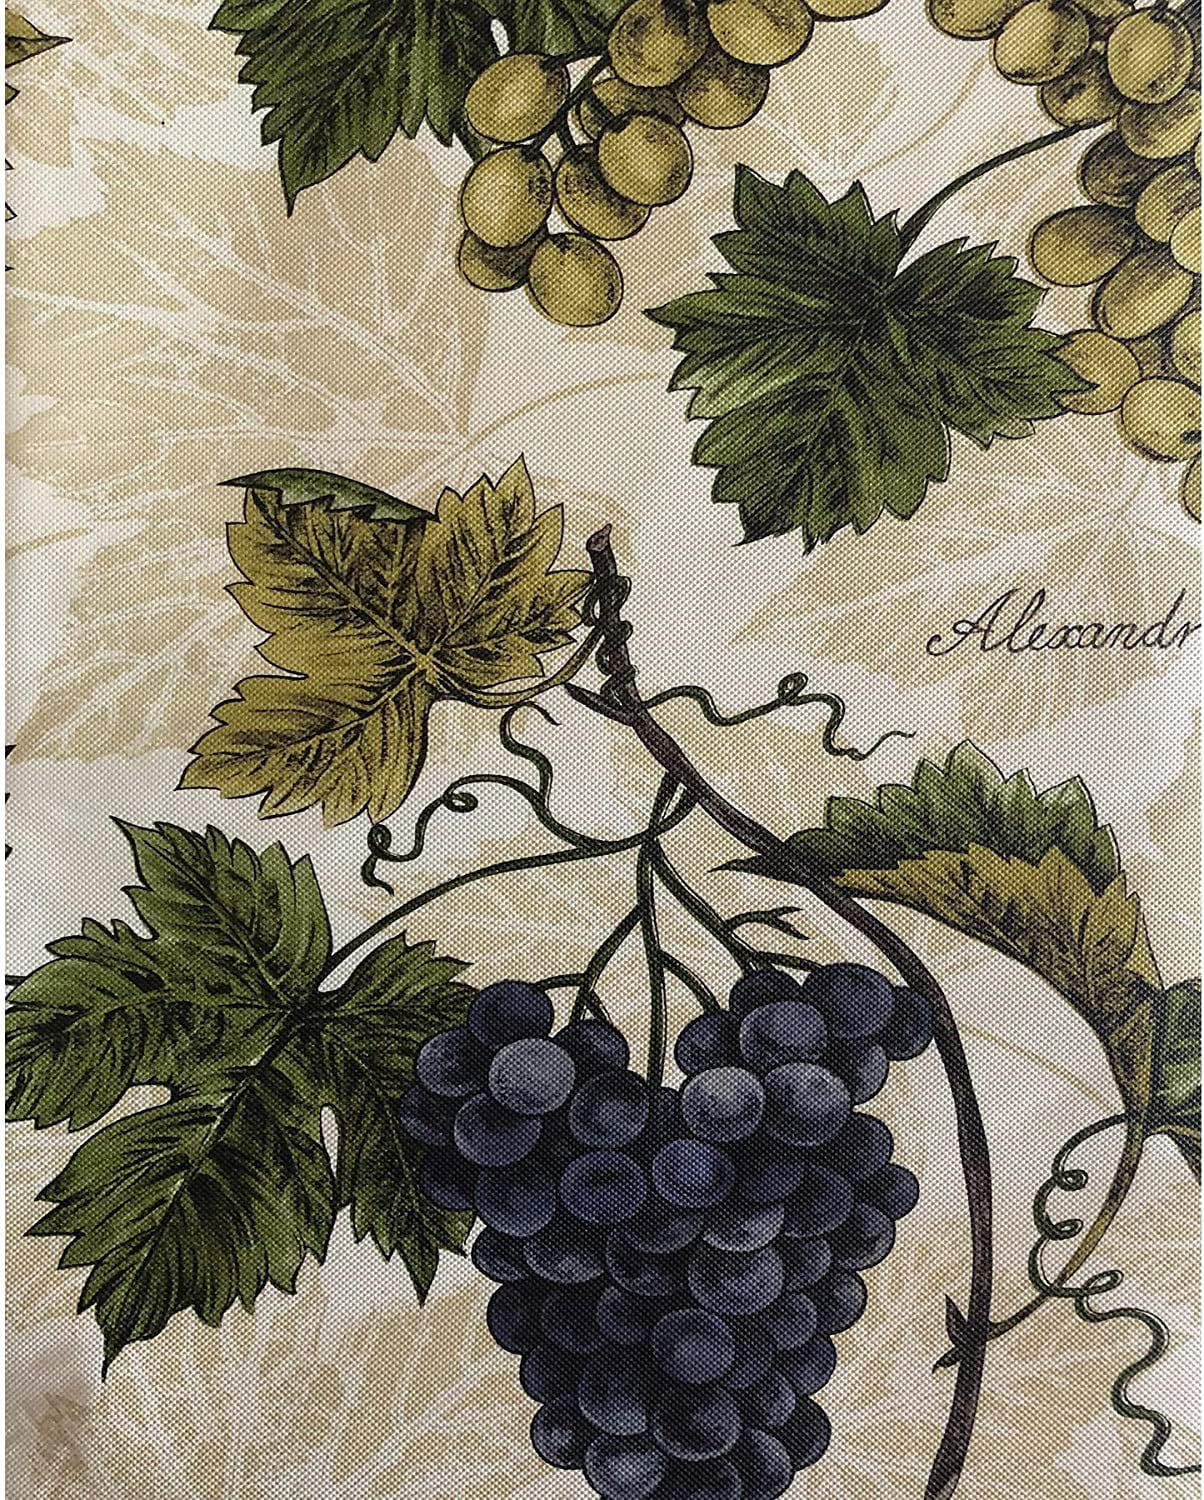 Newbridge Grapevine Vinyl Flannel Backed Tablecloth 52 Inch x 52 Inch Square Picnic Barbeque Grape Theme Indoor/Outdoor Waterproof Tablecloth Patio and Kitchen Dining